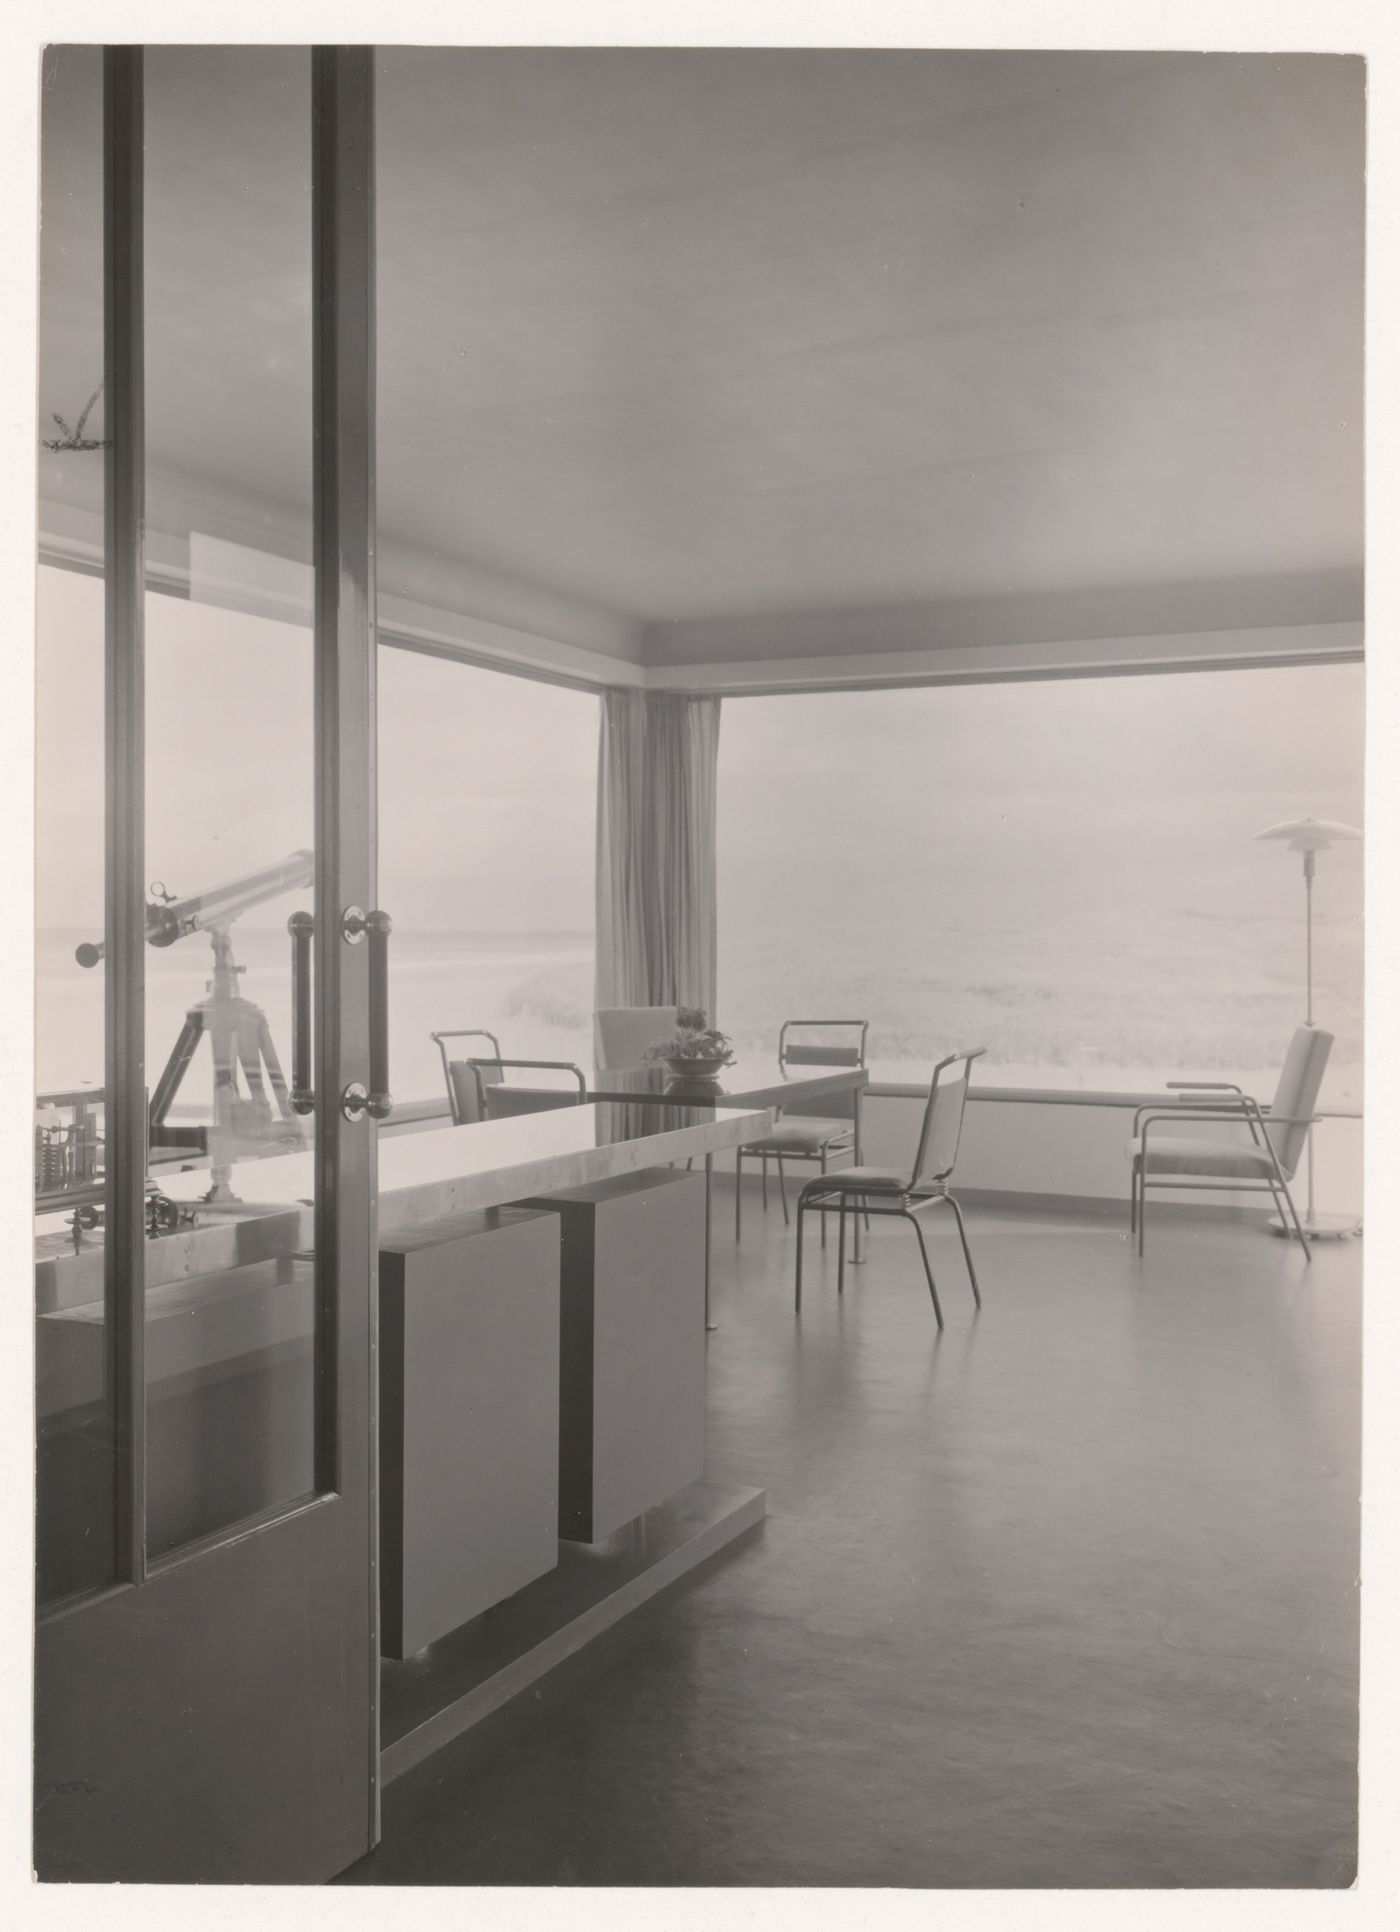 Interior view of the lounge of Villa Allegonda showing a table, chairs and built-in furniture designed by J.J.P. Oud, Katwijk aan Zee, Netherlands